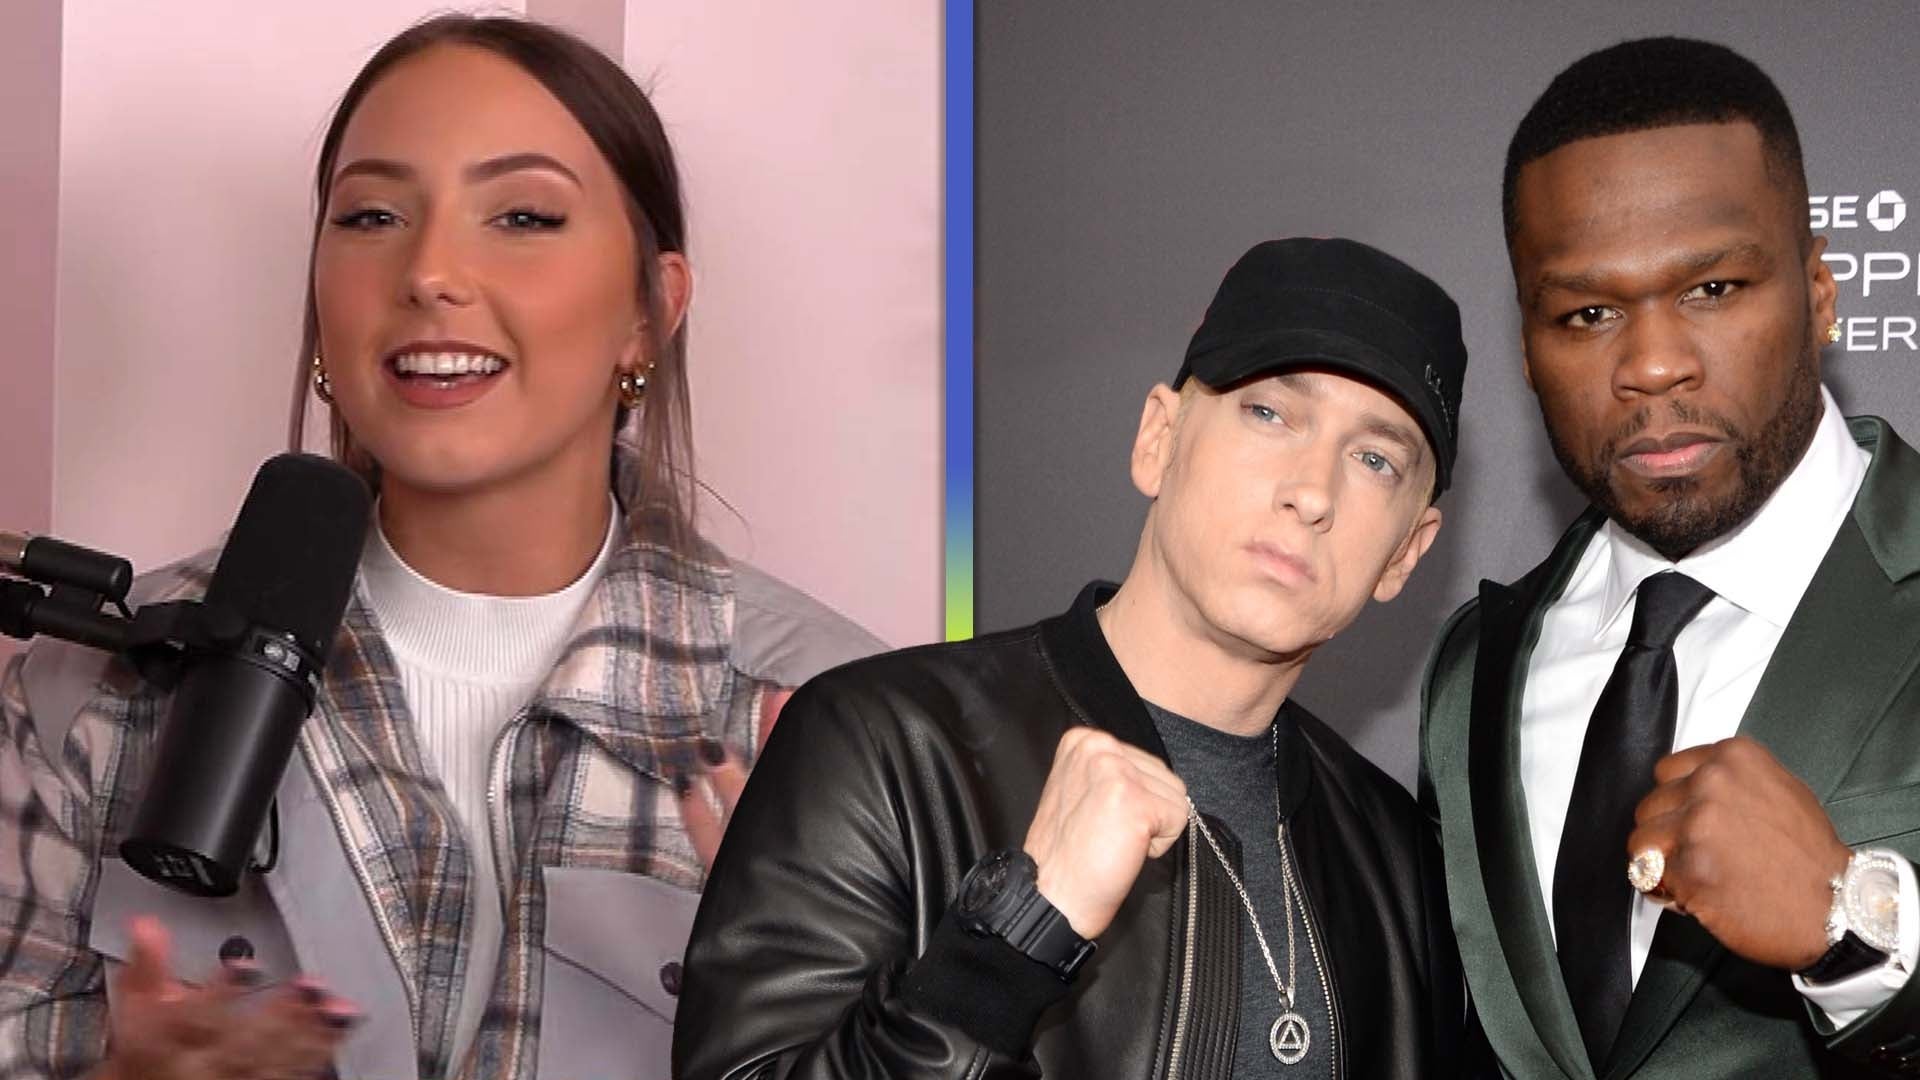 Eminem's Daughter Hailie Jade Was 'So Hyped' Watching Her Dad Perform With 50 Cent